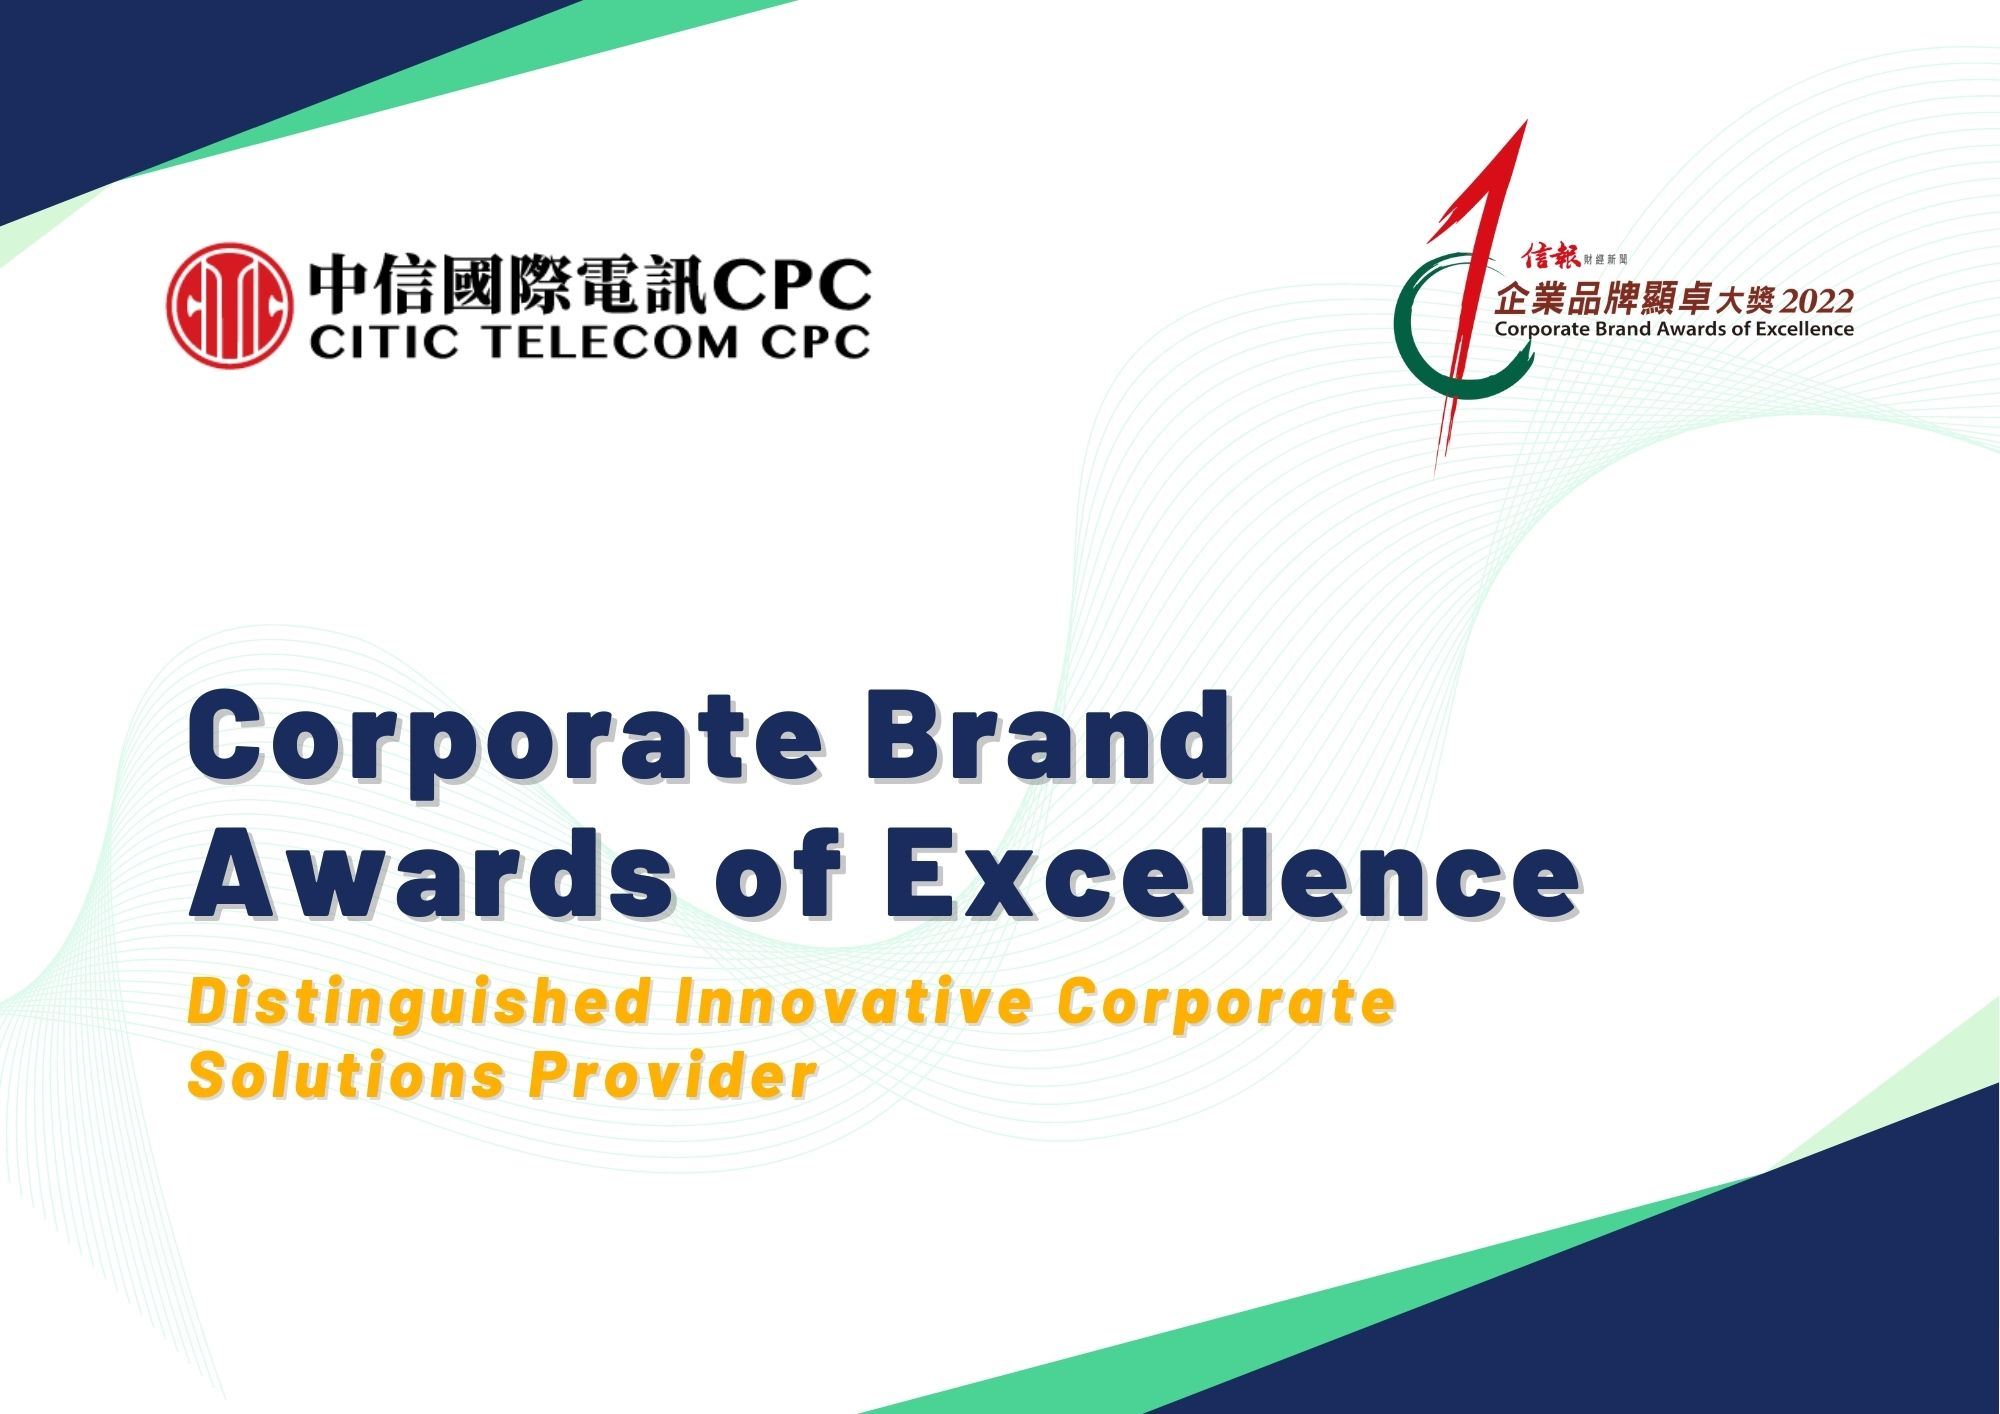 Corporate Brand Awards of Excellence 